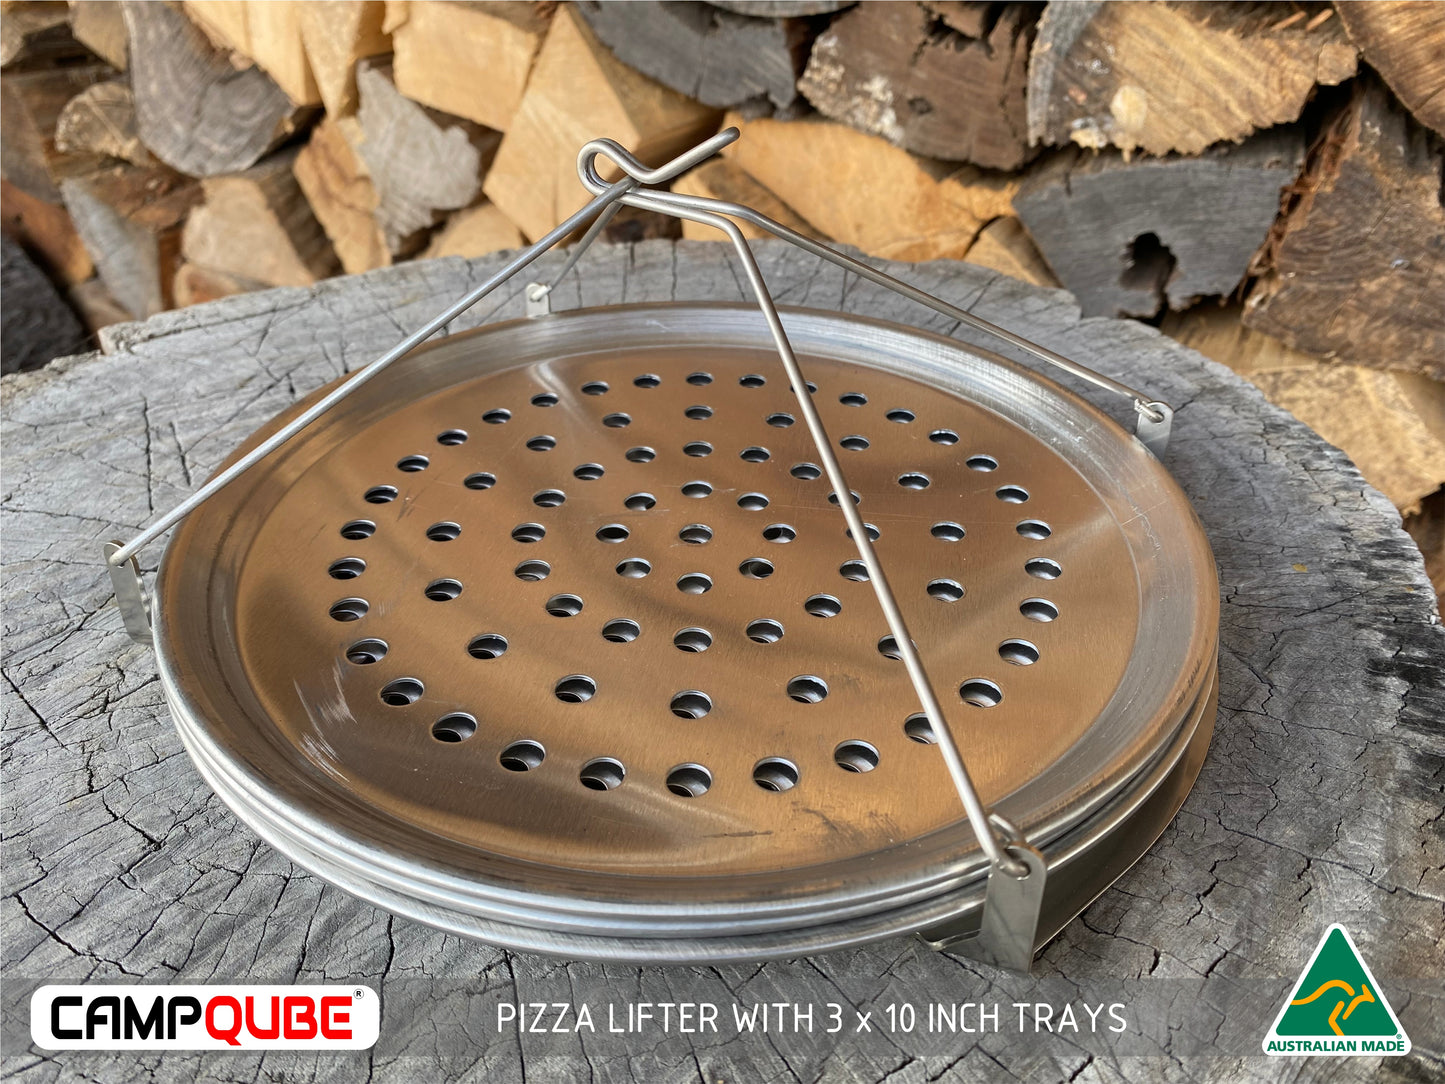 **IN STOCK READY TO SHIP** CAMPQUBE - PIZZA LIFTER AND 3X TRAYS